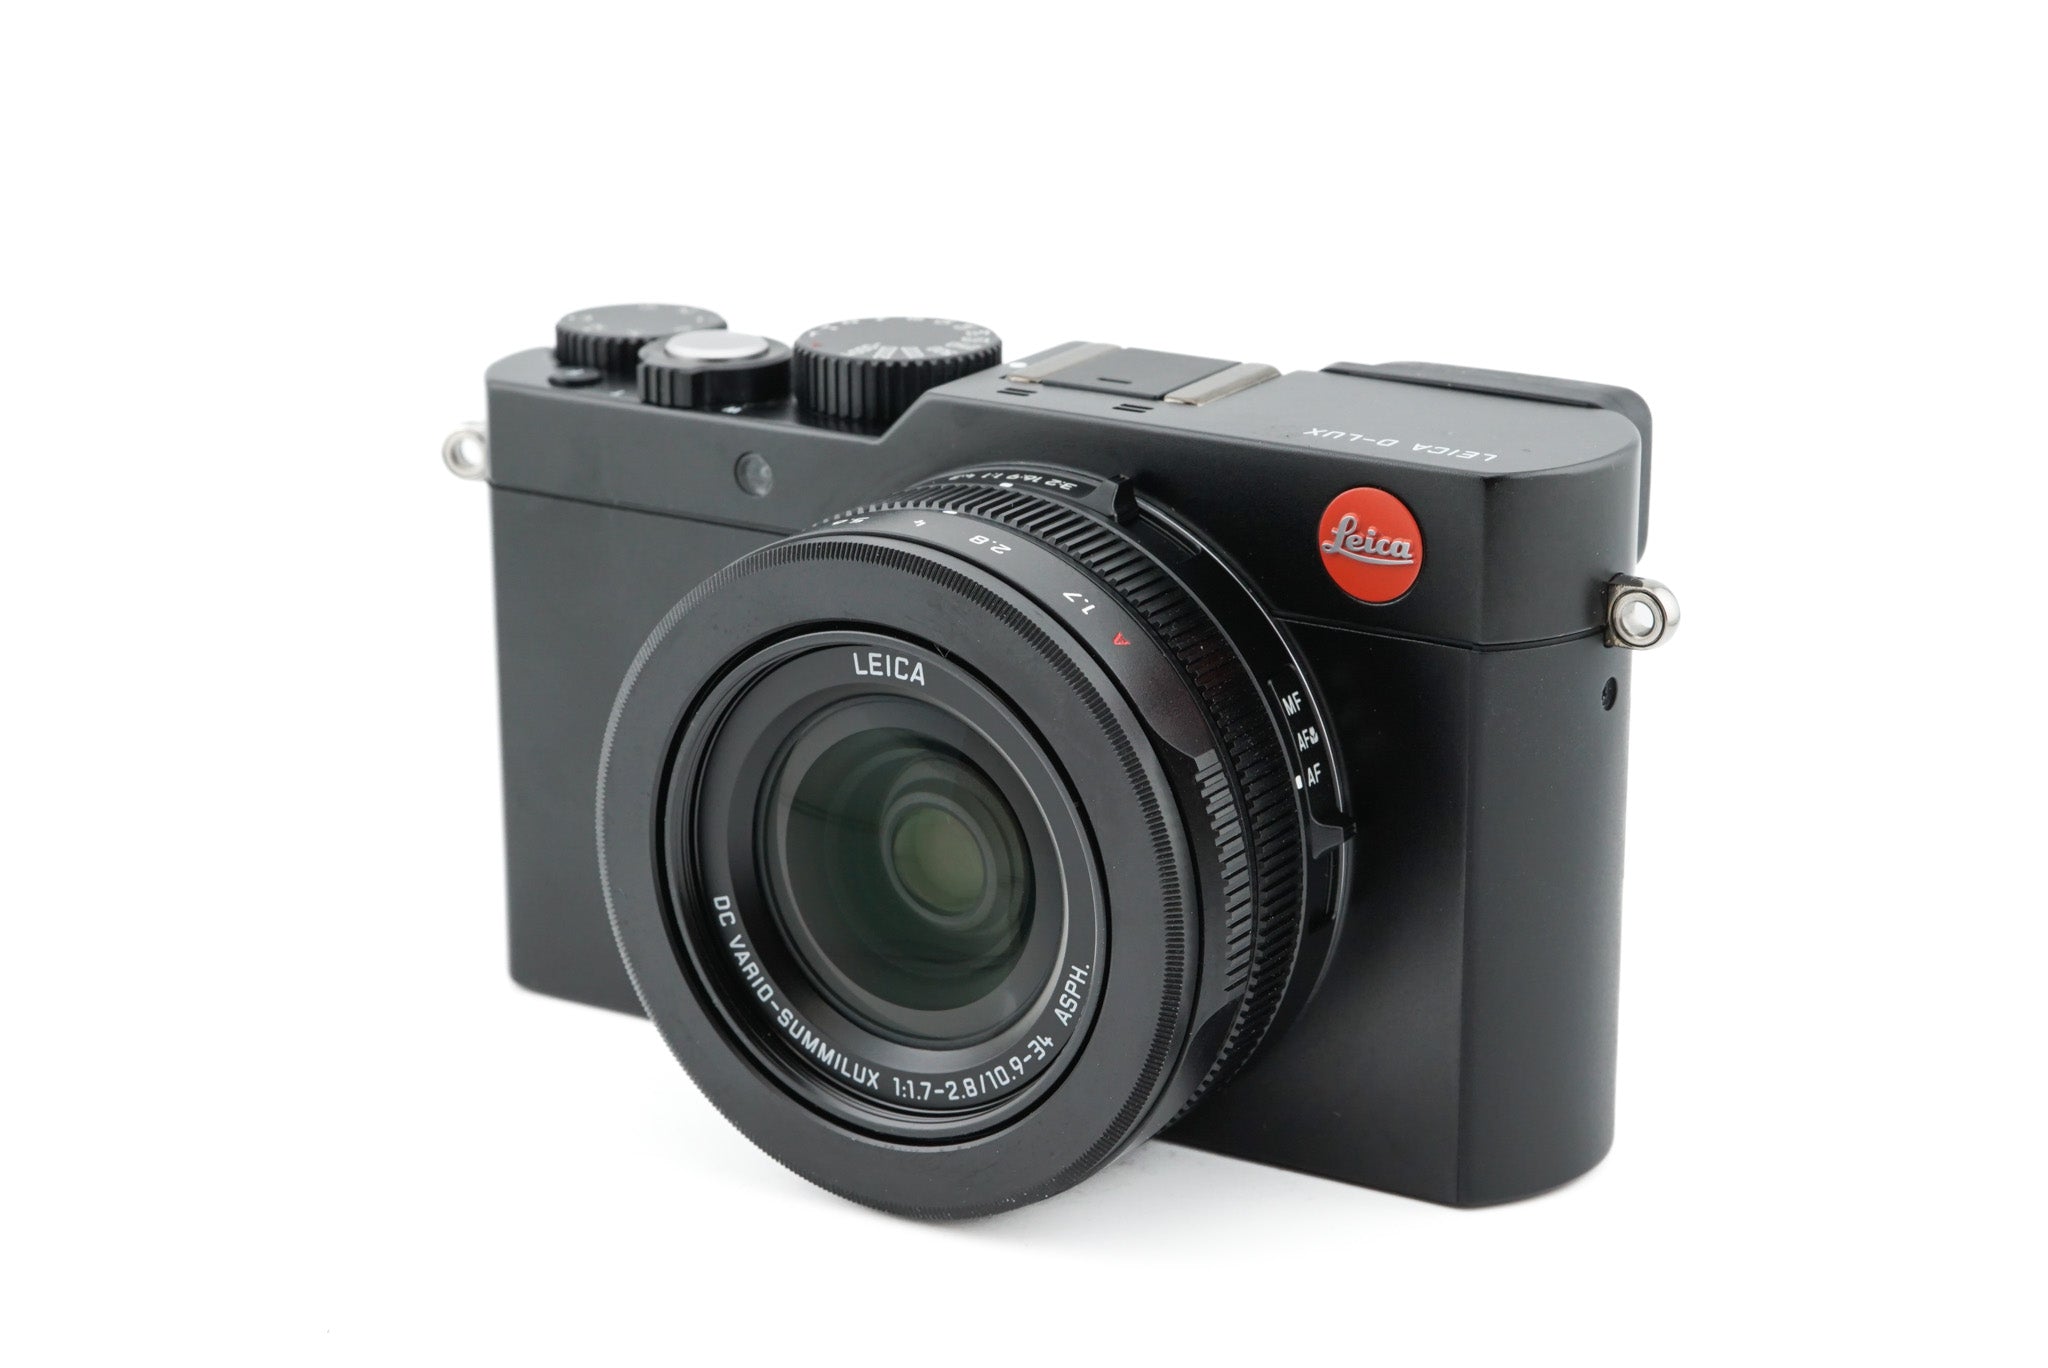 Leica D-Lux Type 109 12.8 MP Compact Digital Camera - Black - Good  Condition 799429184711